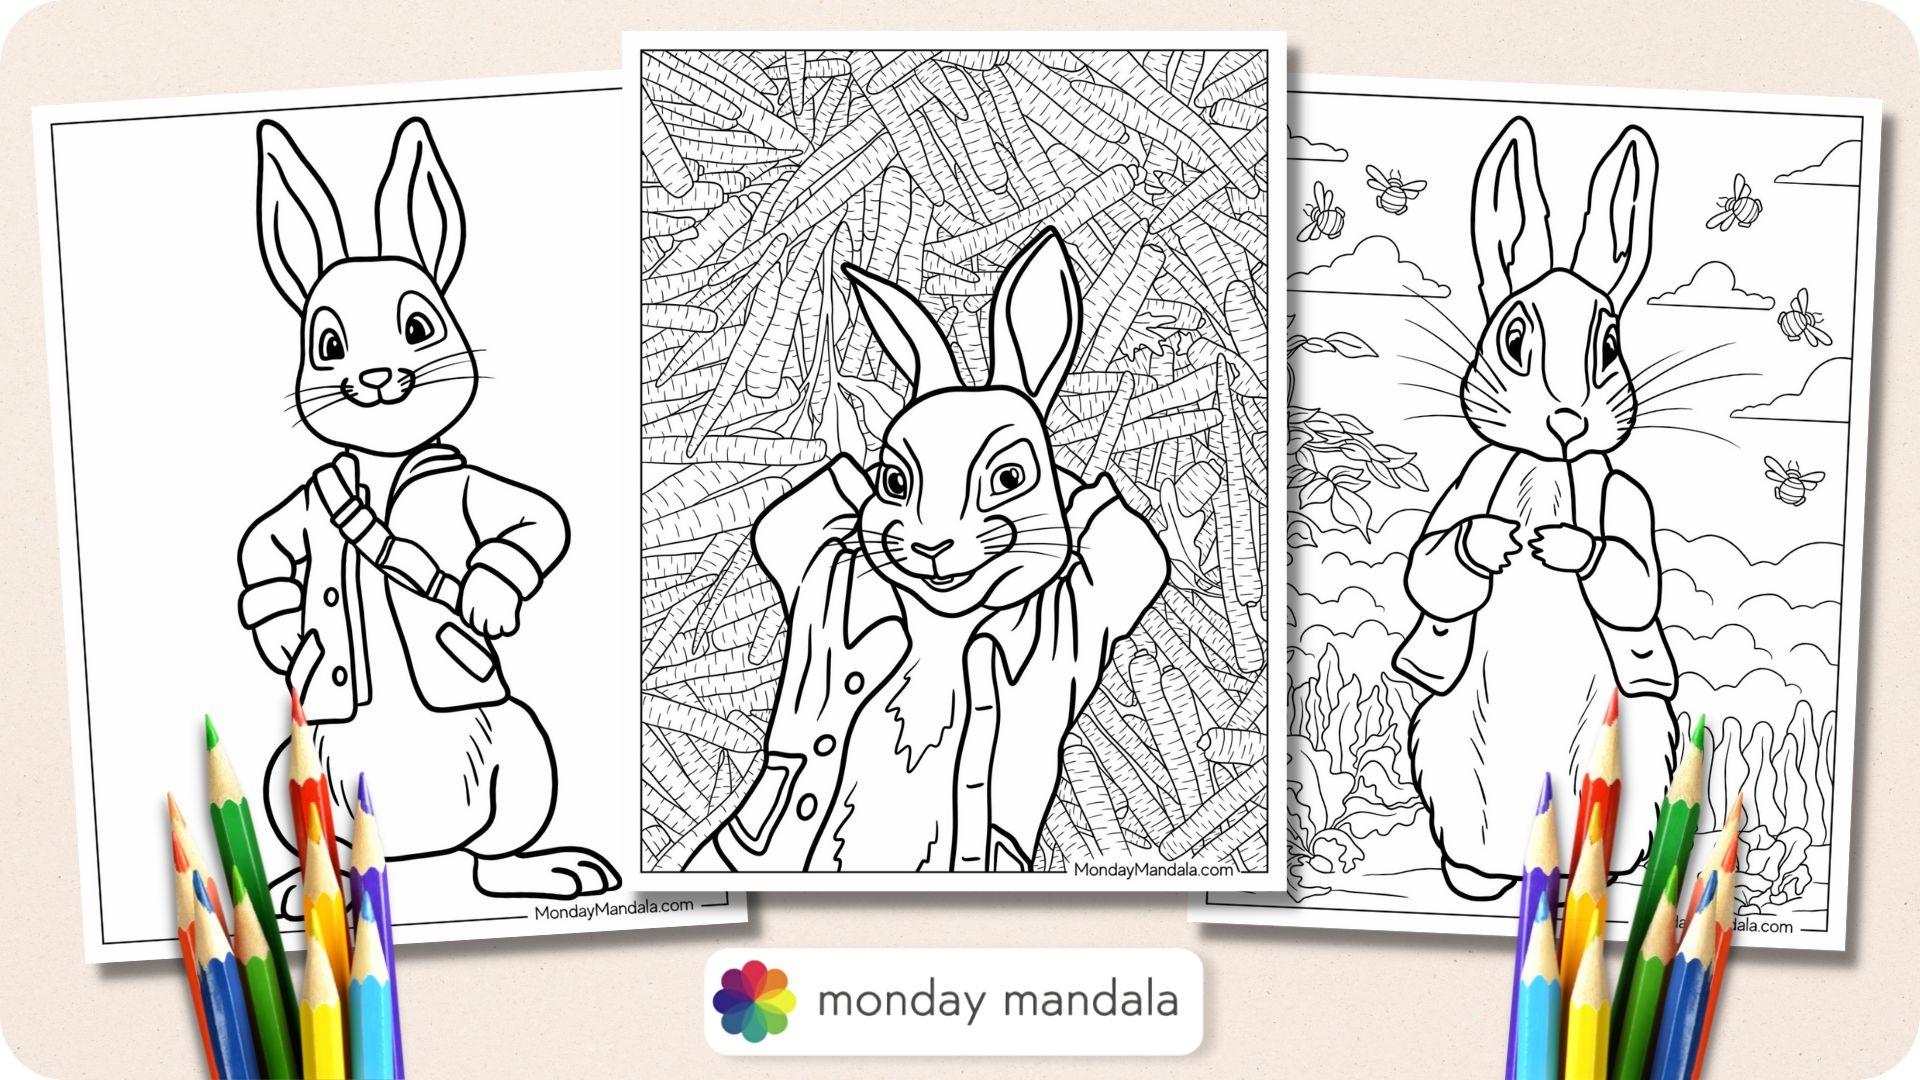 20 Peter Rabbit Coloring Pages (Free Pdf Printables) - Free Printable Peter Rabbit Images